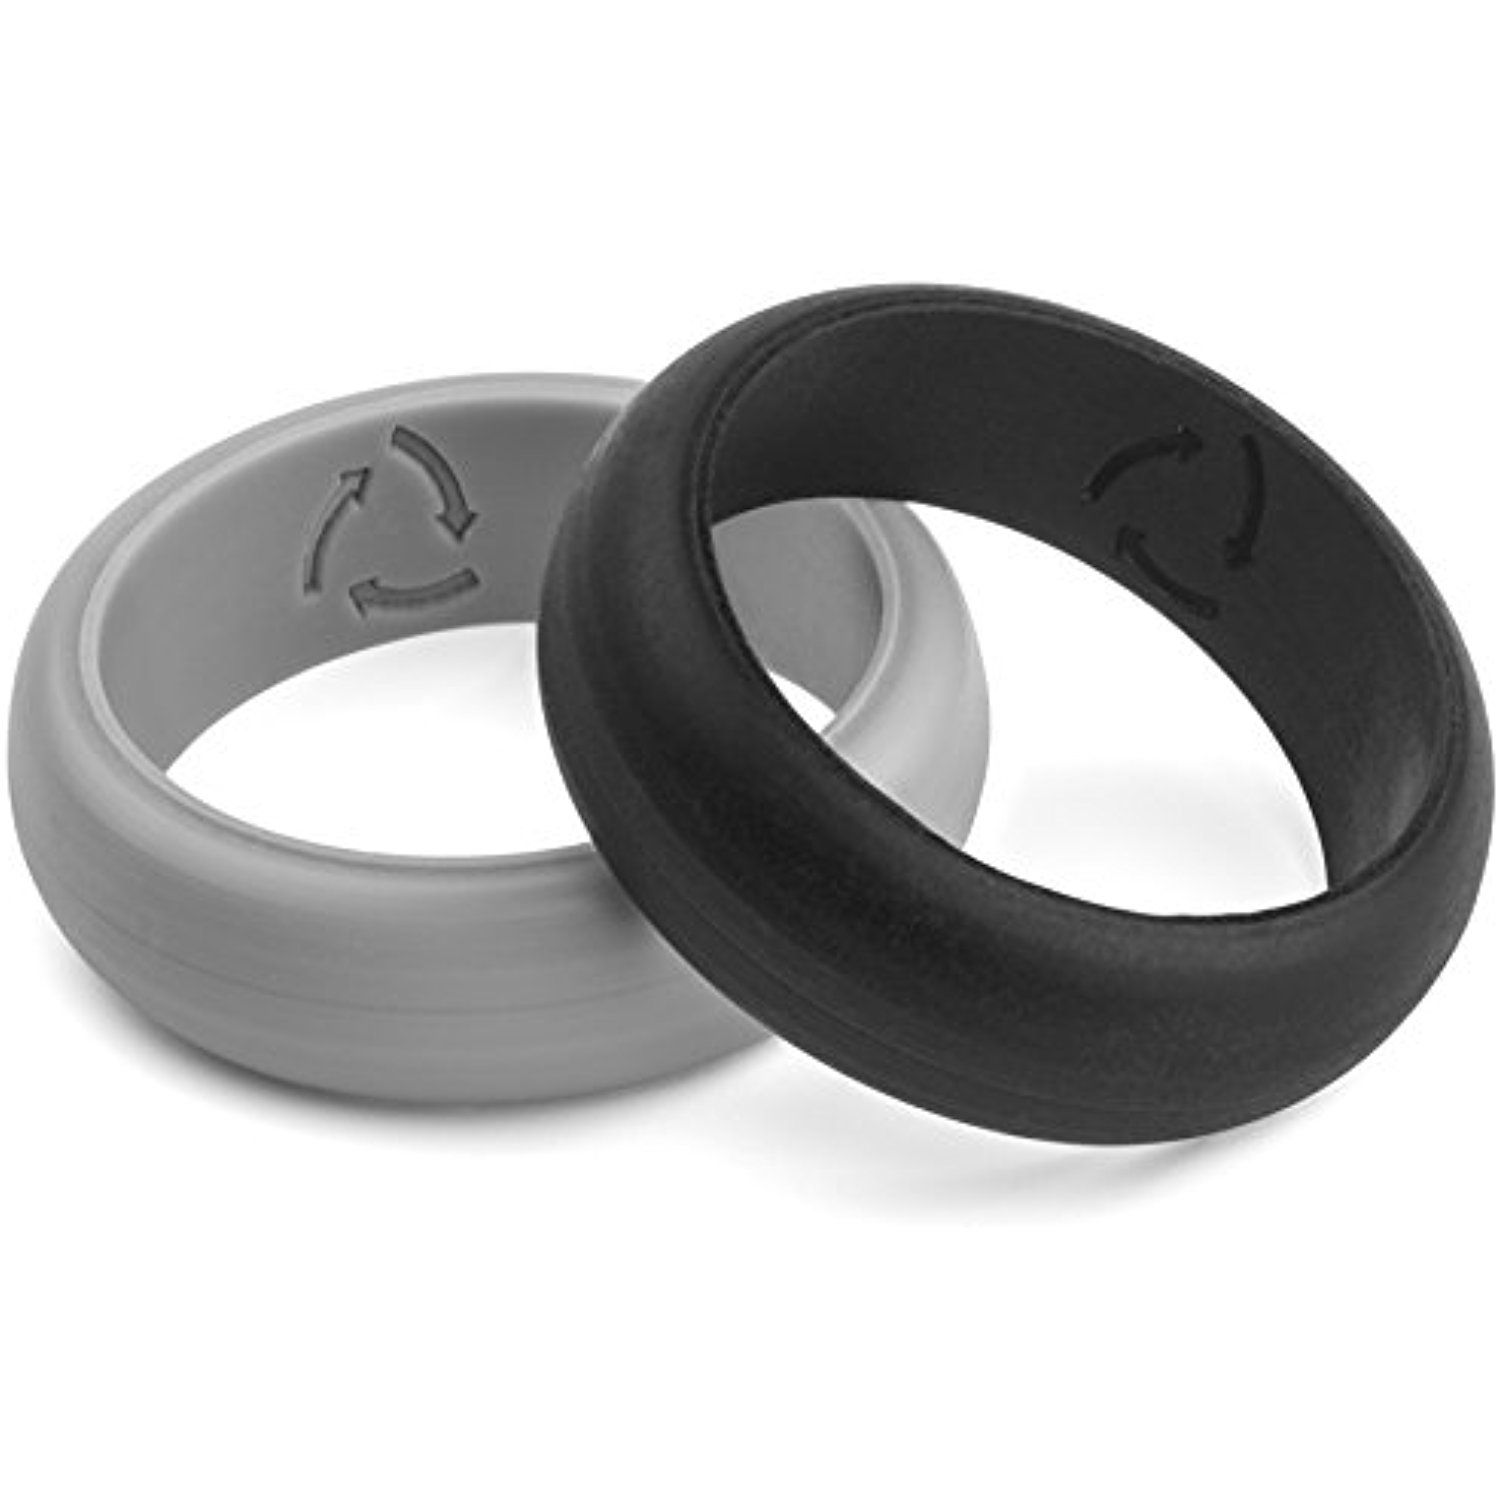 Premium Silicone Wedding Band For The Active/Working ...